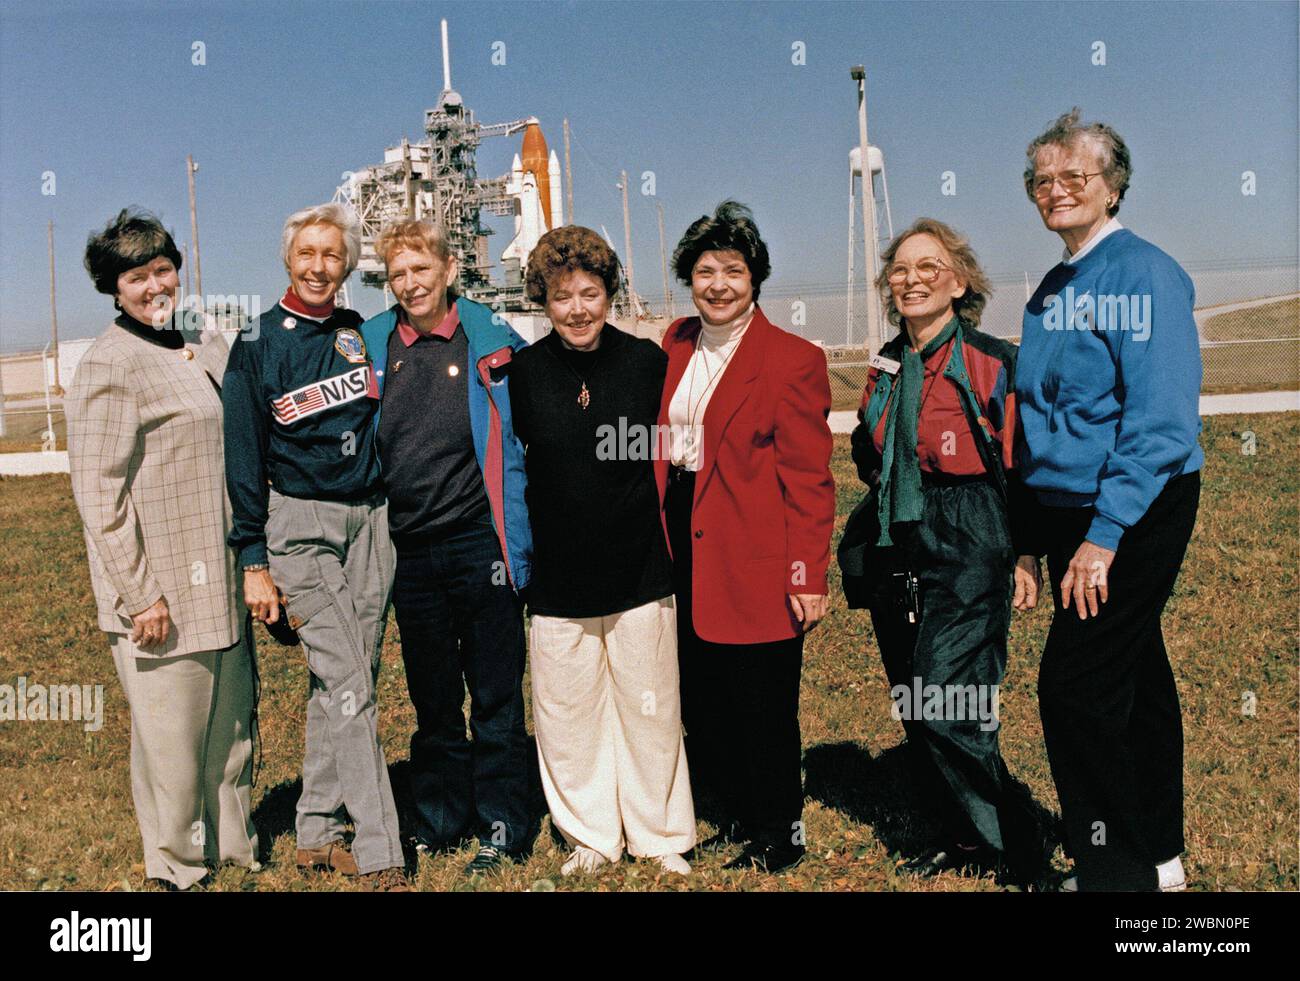 CAPE CANAVERAL, Fla. -- Exuberant and thrilled to be at Kennedy Space Center, seven women who once aspired to fly into space stand outside Launch Pad 39B near the space shuttle Discovery, poised for liftoff on the first flight of 1995. Visiting the space center as invited guests of STS-63 Pilot Eileen Collins are from left Gene Nora Jessen, Wally Funk, Jerrie Cobb, Jerri Truhill, Sarah Rutley, Myrtle Cagle and Bernice Steadman. They are members of the Mercury 13 group of women who trained to become astronauts for America's first human spaceflight program back in the early 1960s. Although the M Stock Photo